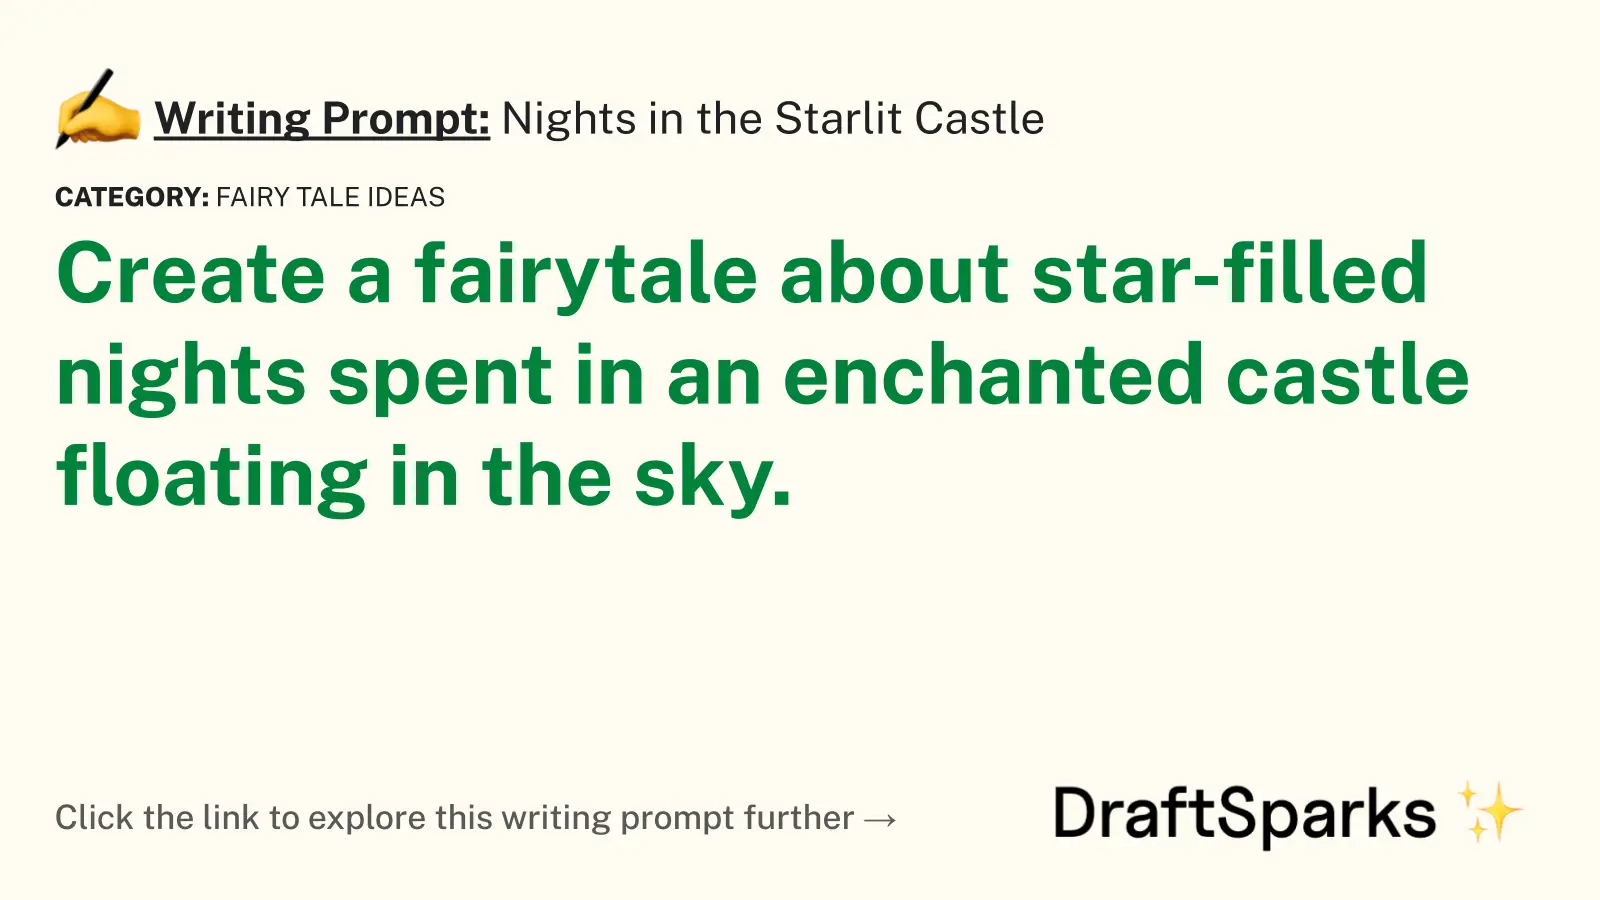 Nights in the Starlit Castle